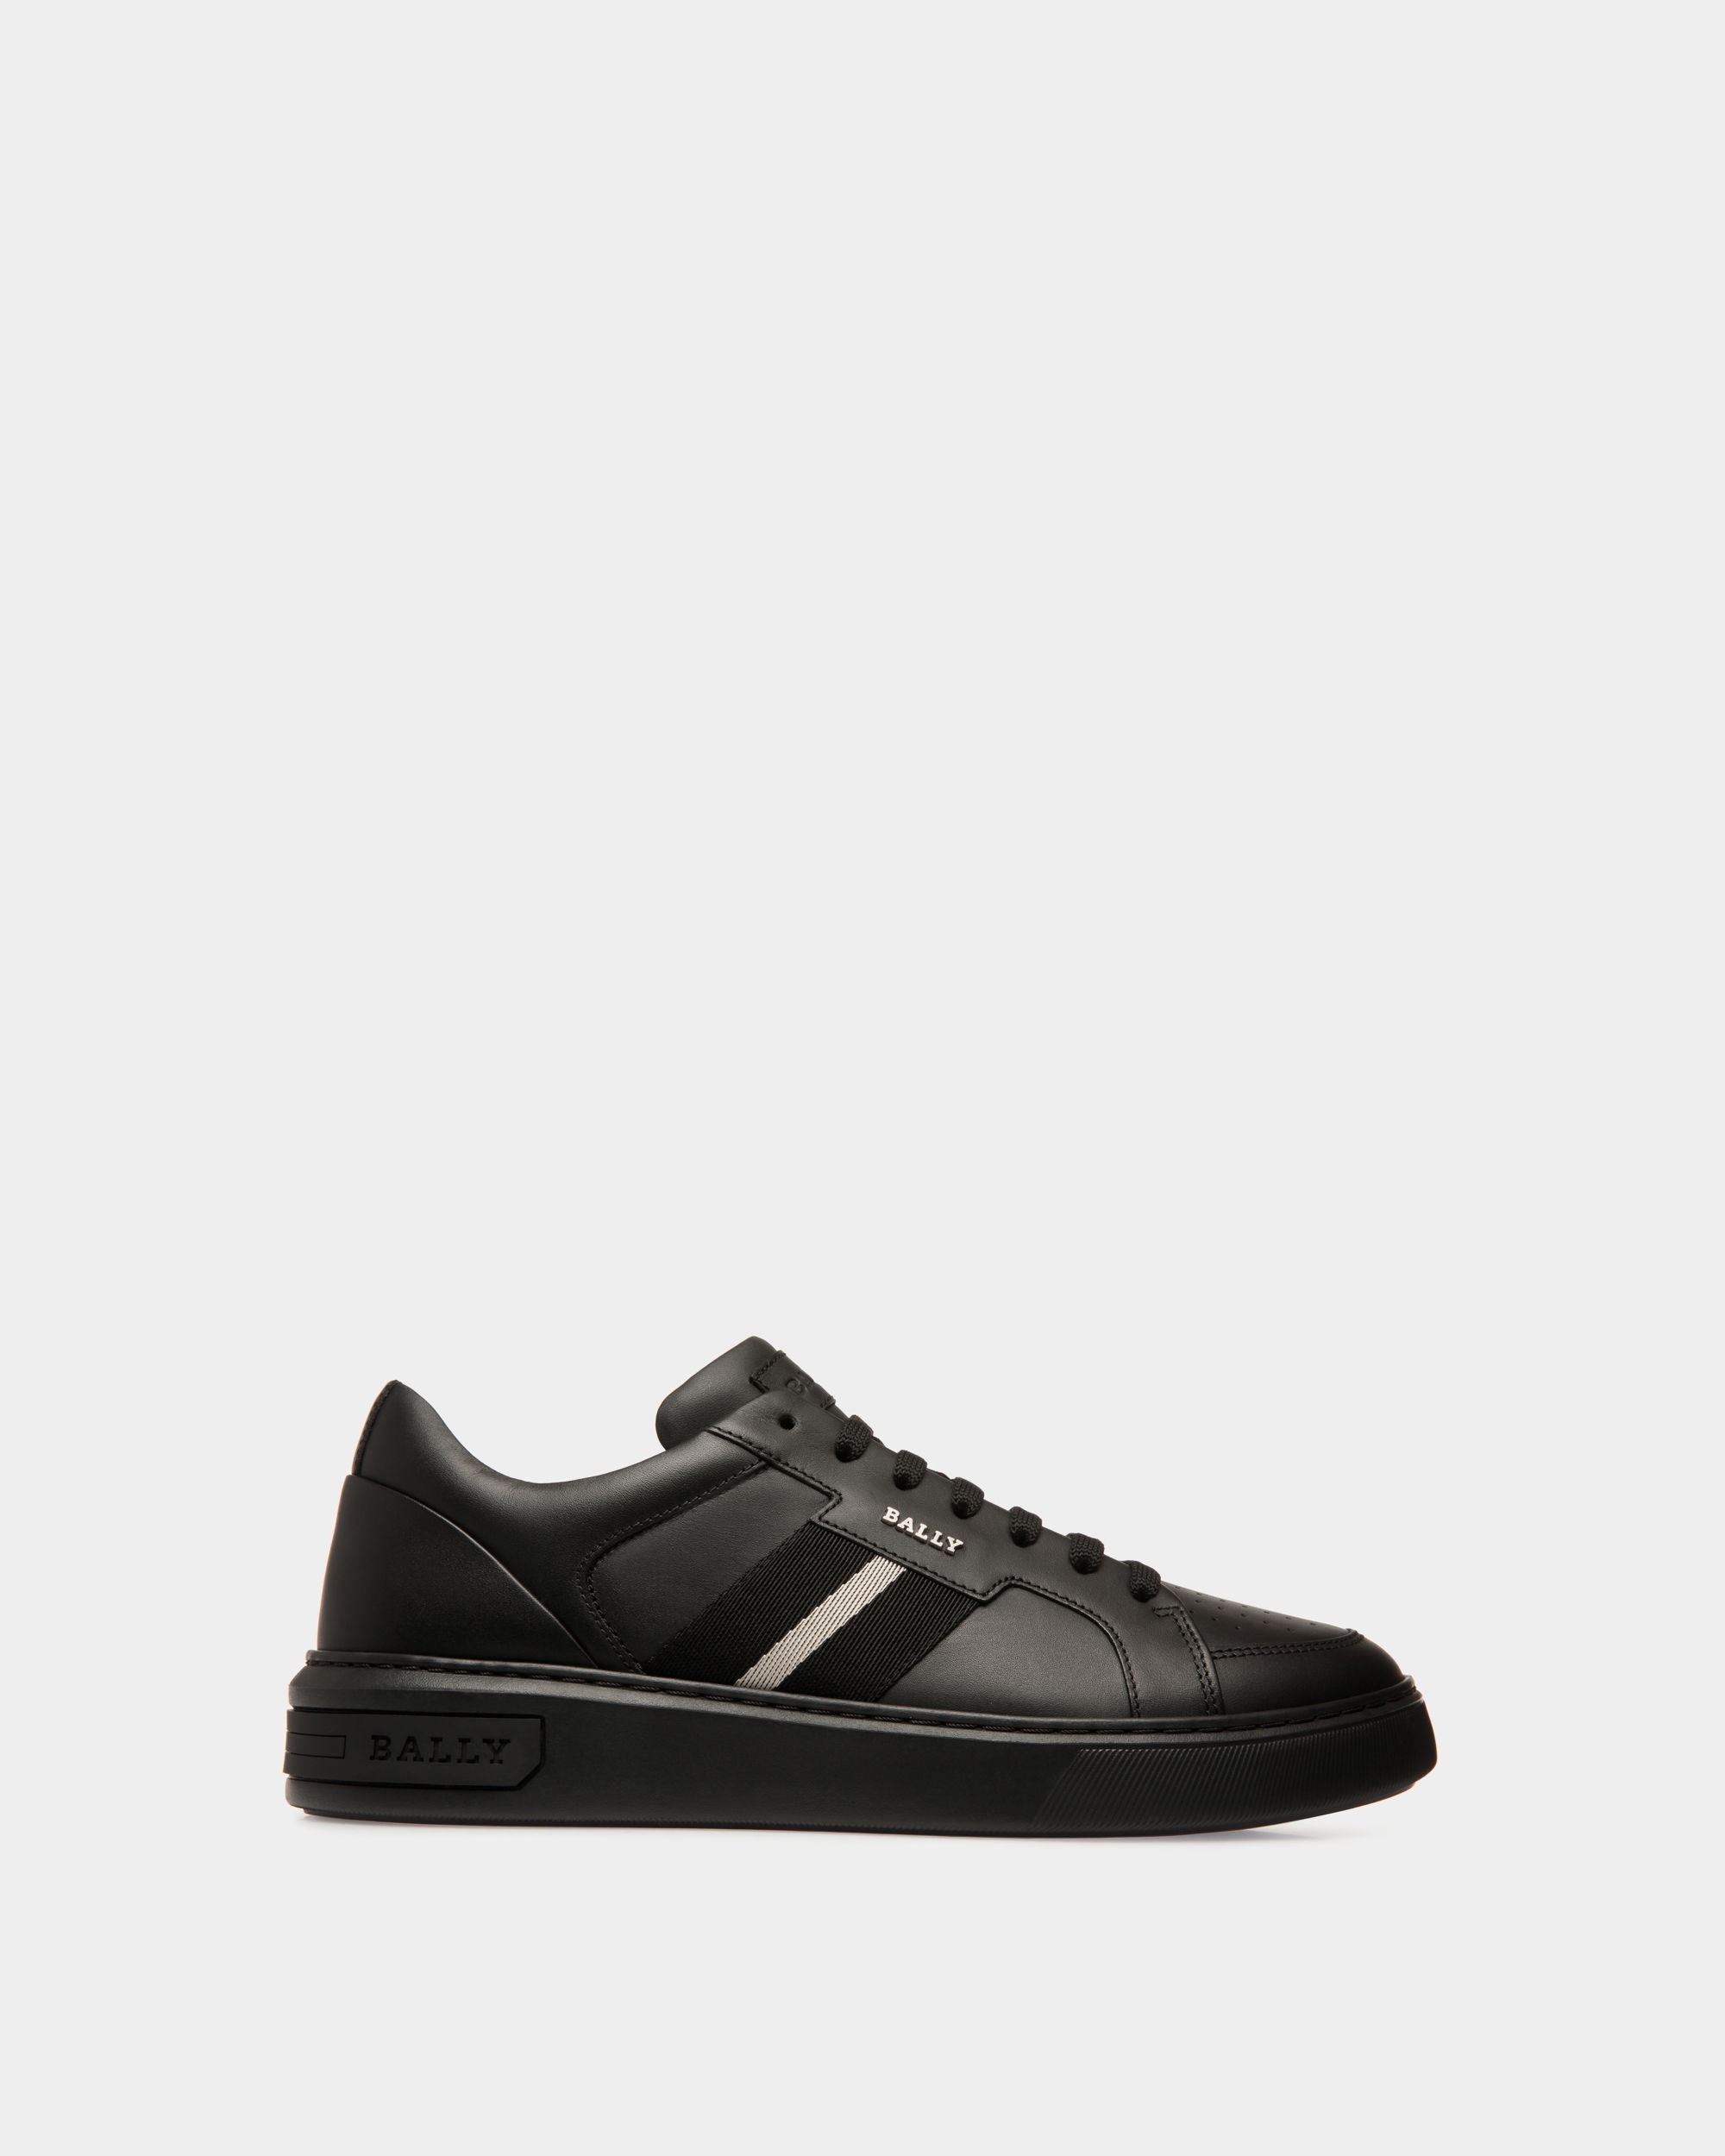 Bally Men's Manuel Leather Low-Top Sneakers | World of Watches